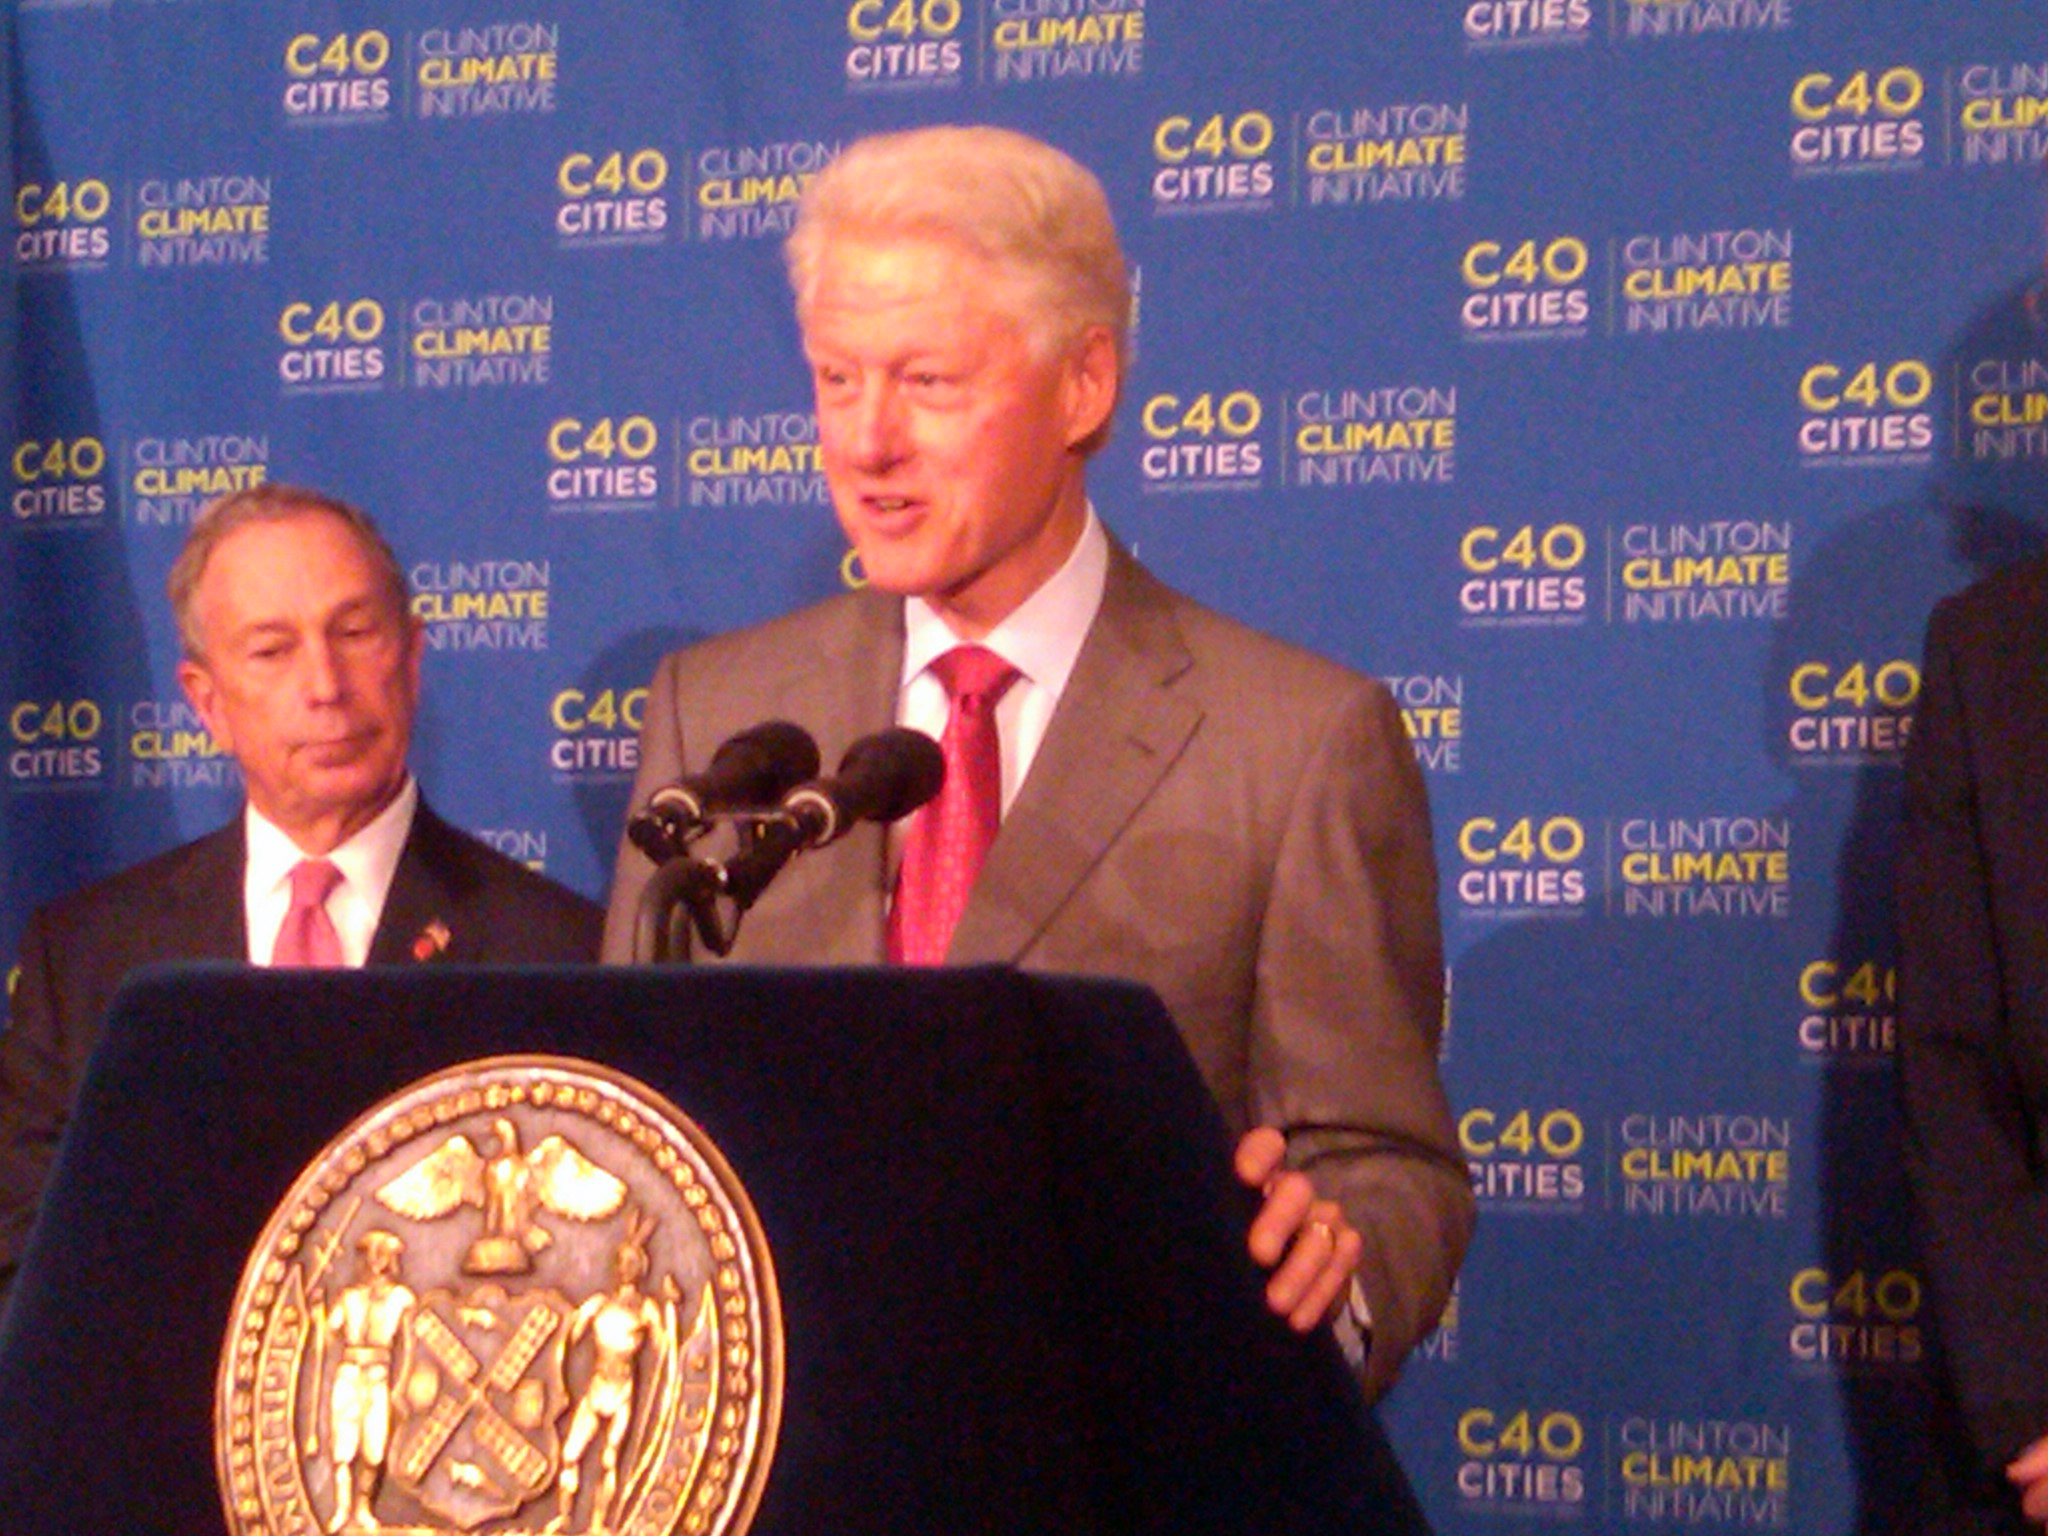 Michael Bloomberg and Bill Clinton at Gracie Mansion 